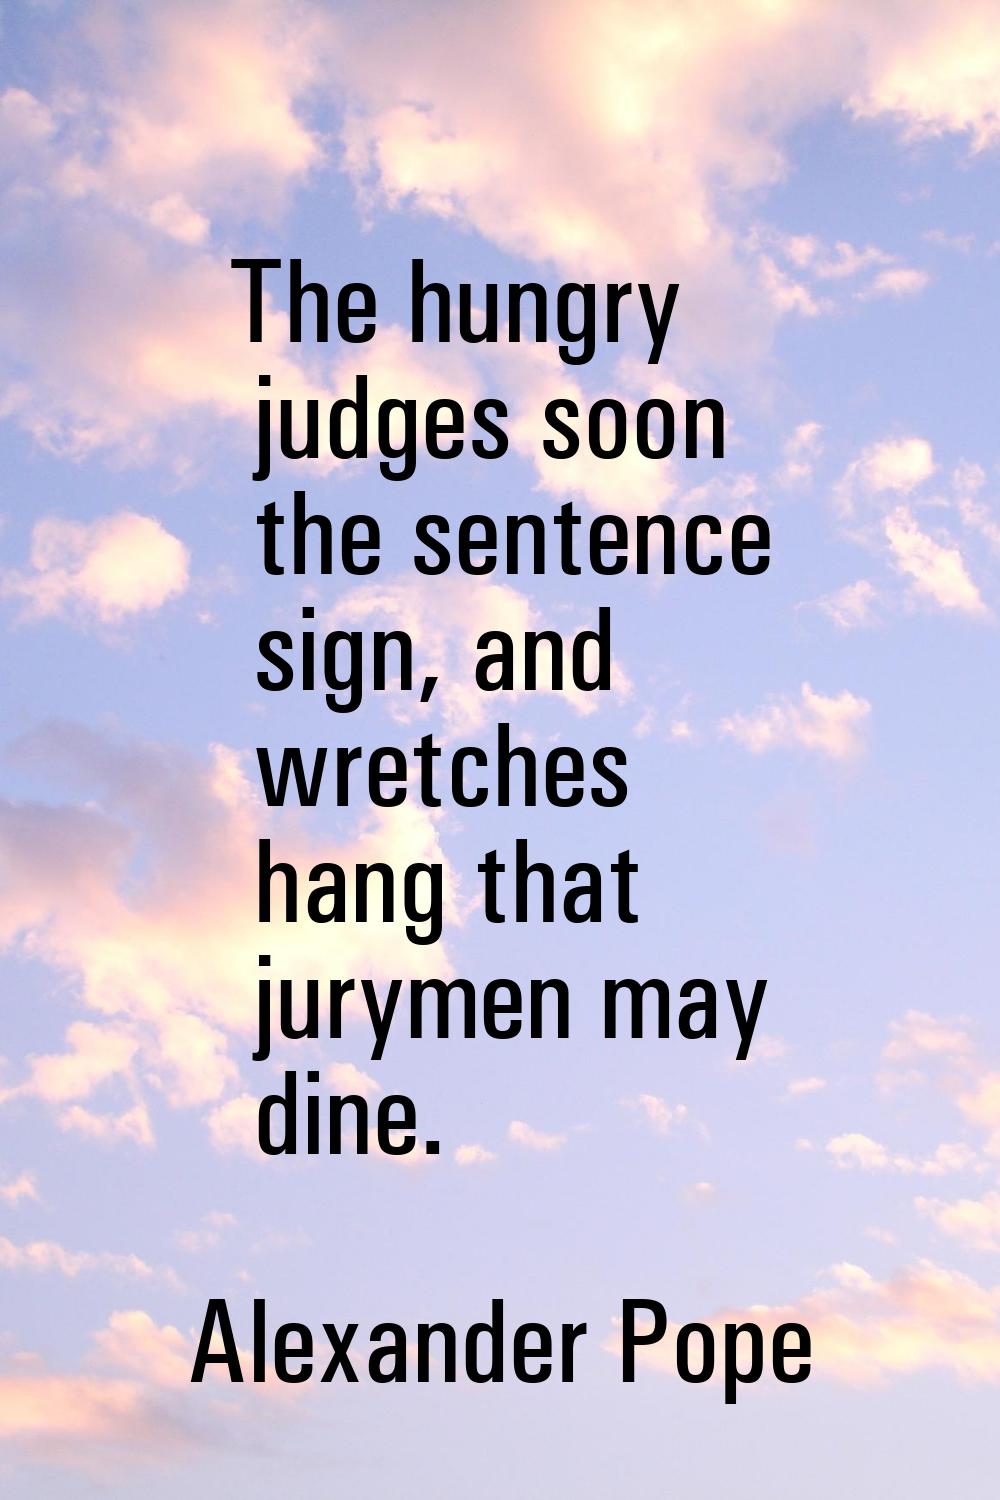 The hungry judges soon the sentence sign, and wretches hang that jurymen may dine.